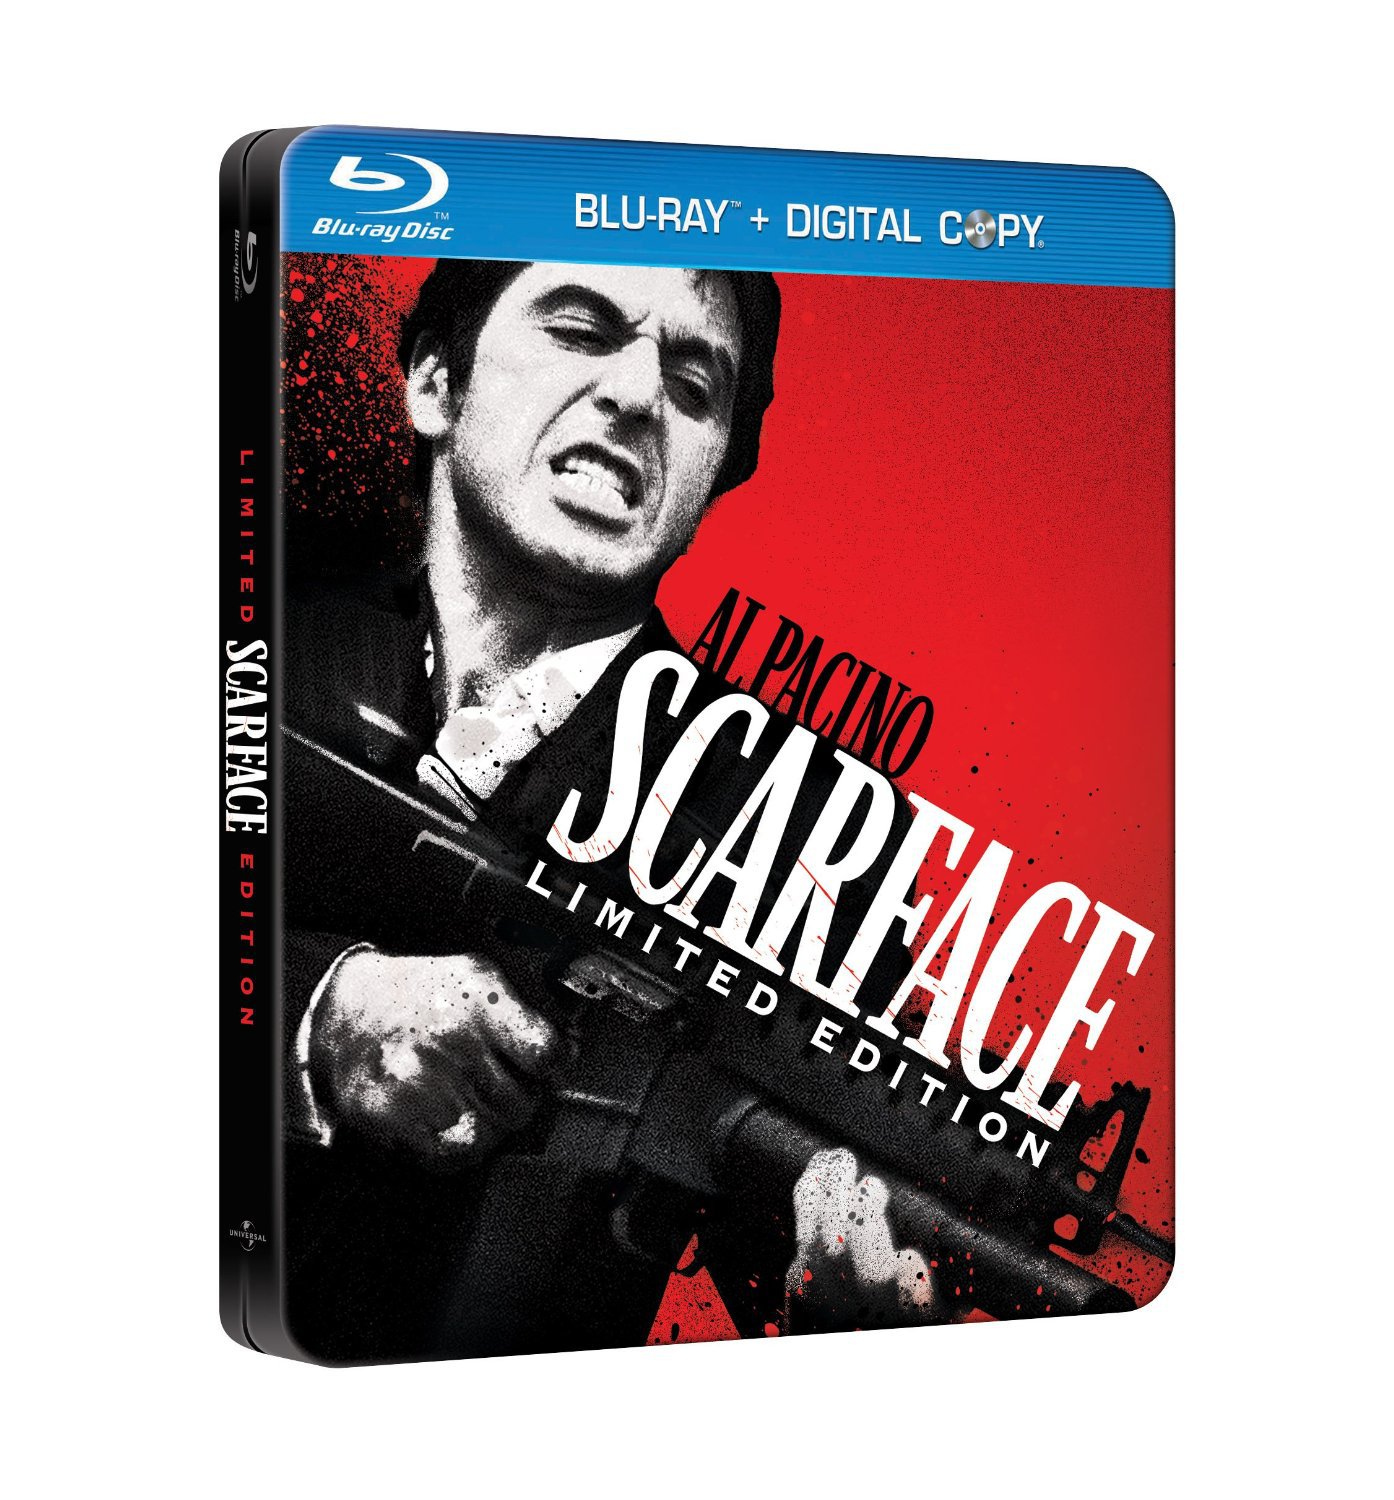 Scarface: Limited Edition